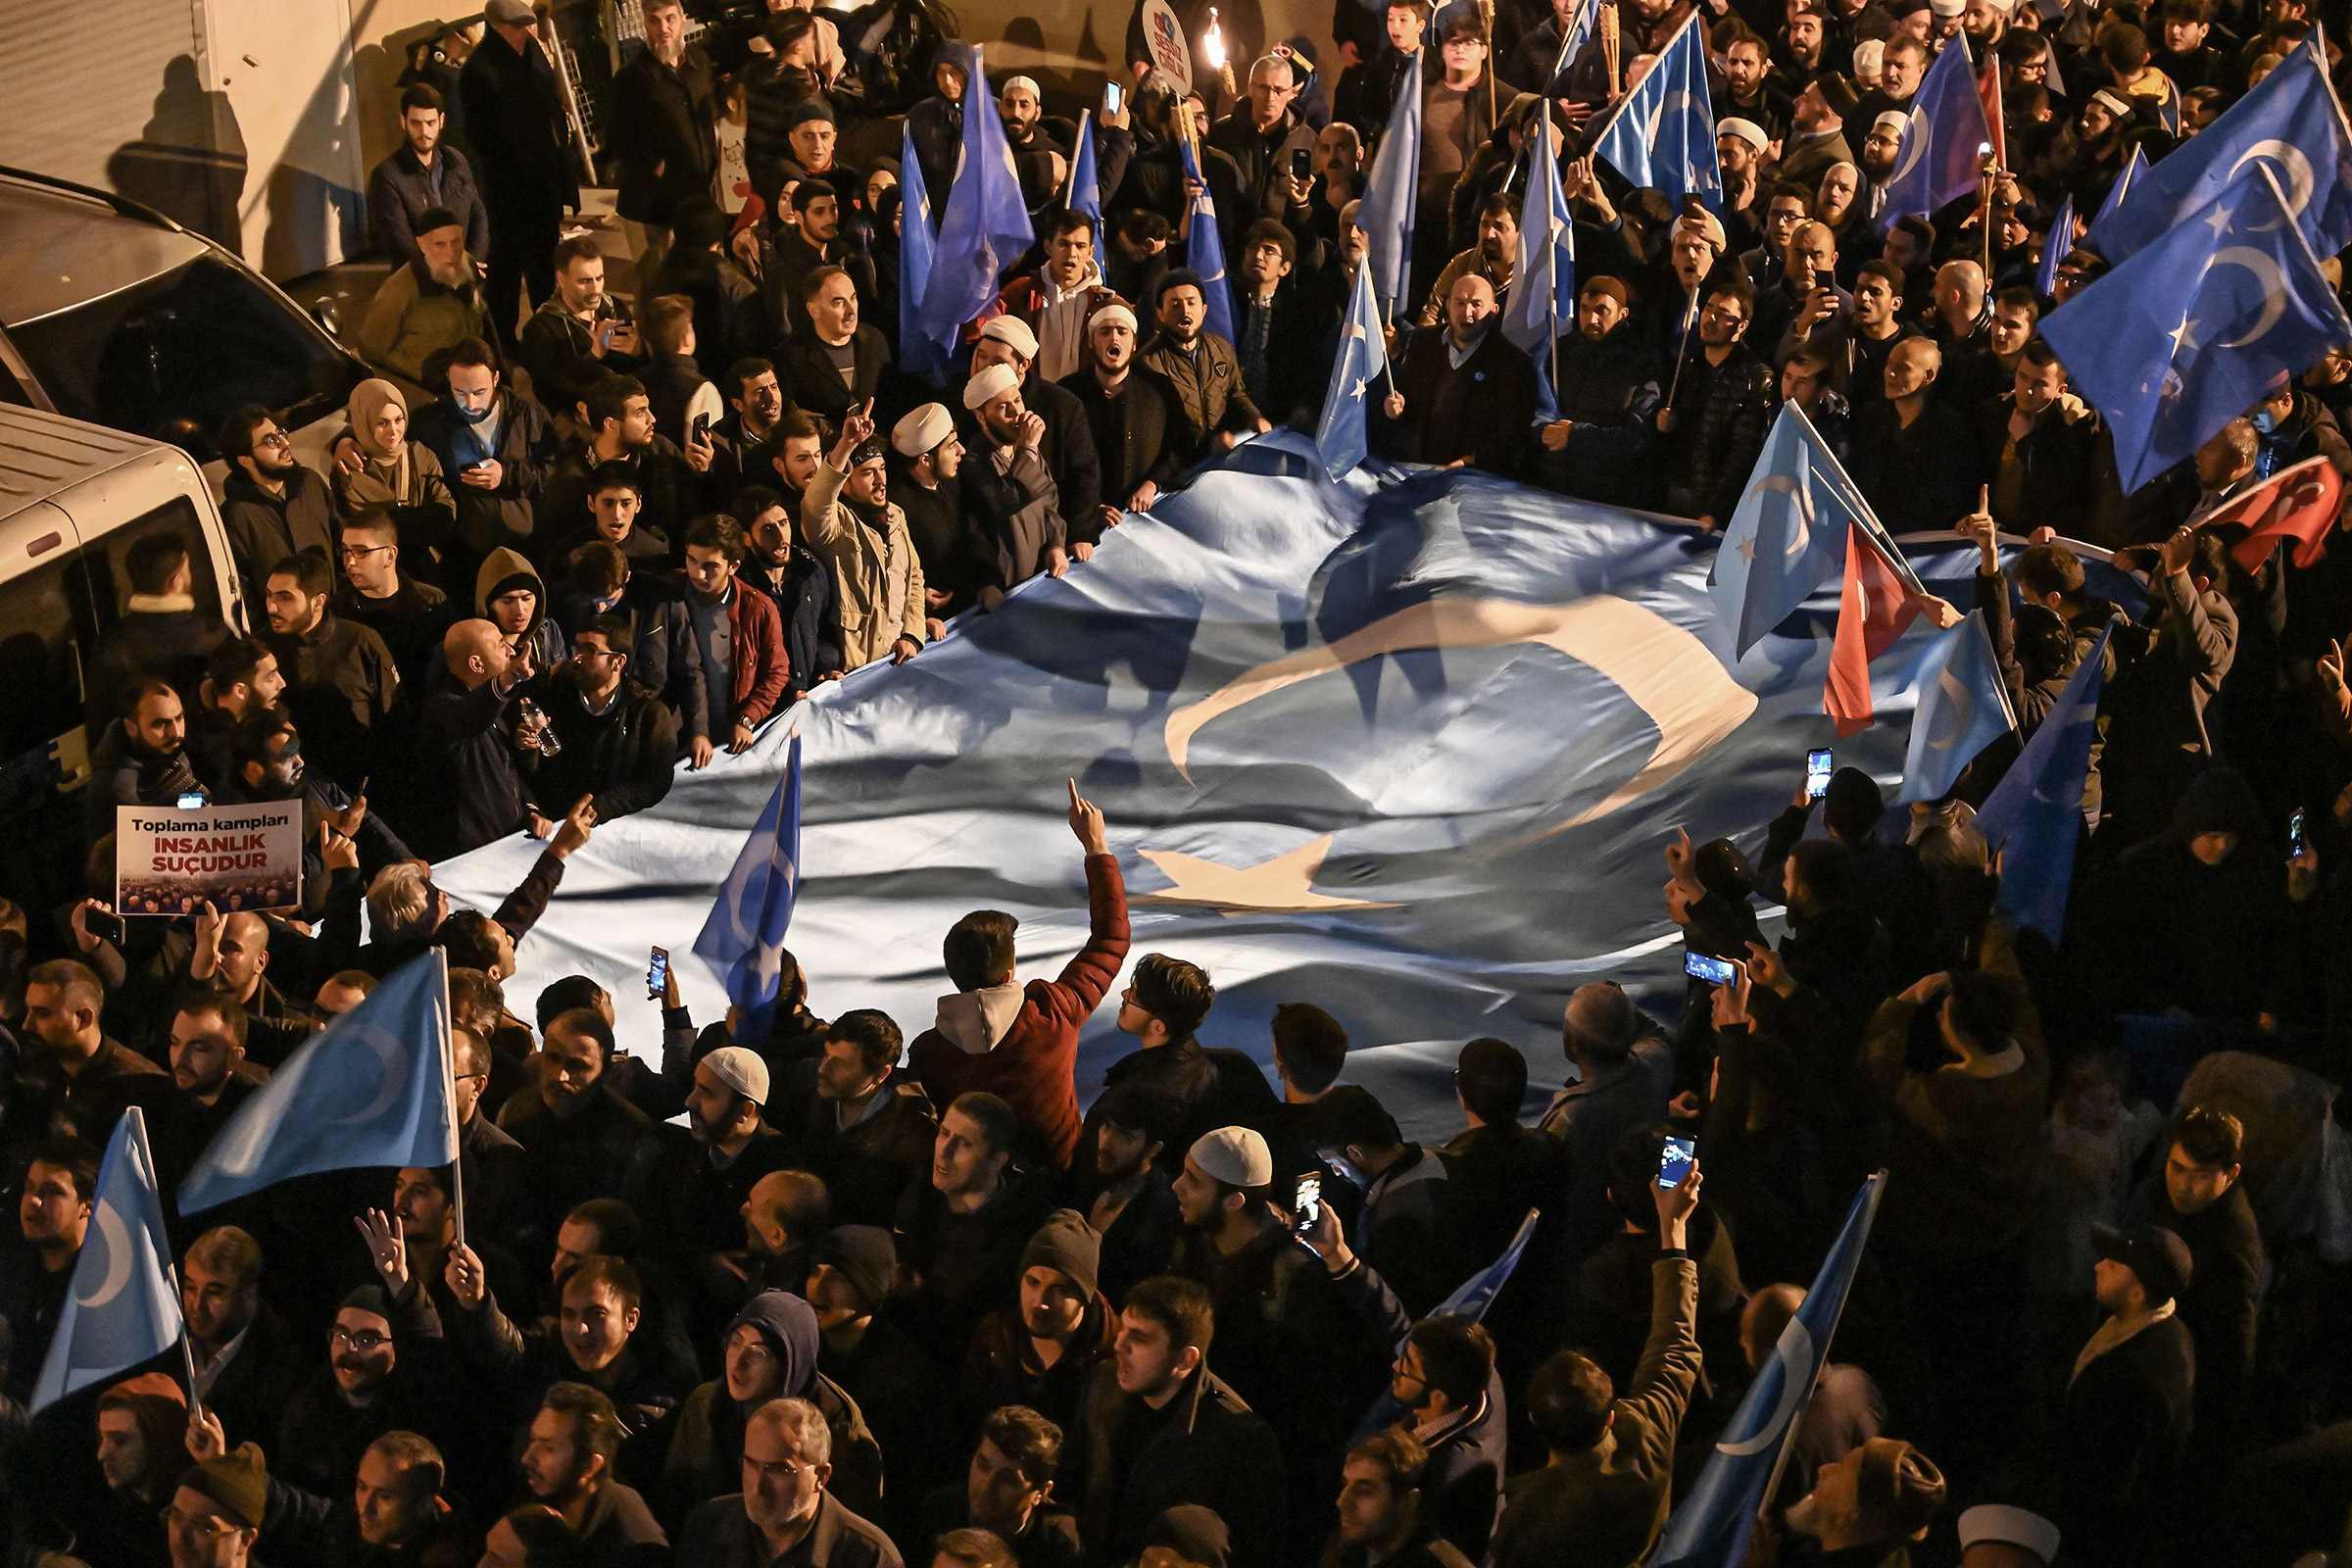 Supporters of China's Muslim Uighur minority march with flags of East Turkestan during a demonstration in Istanbul on Dec. 20, 2019. (Ozan Kose—AFP/Getty Images)